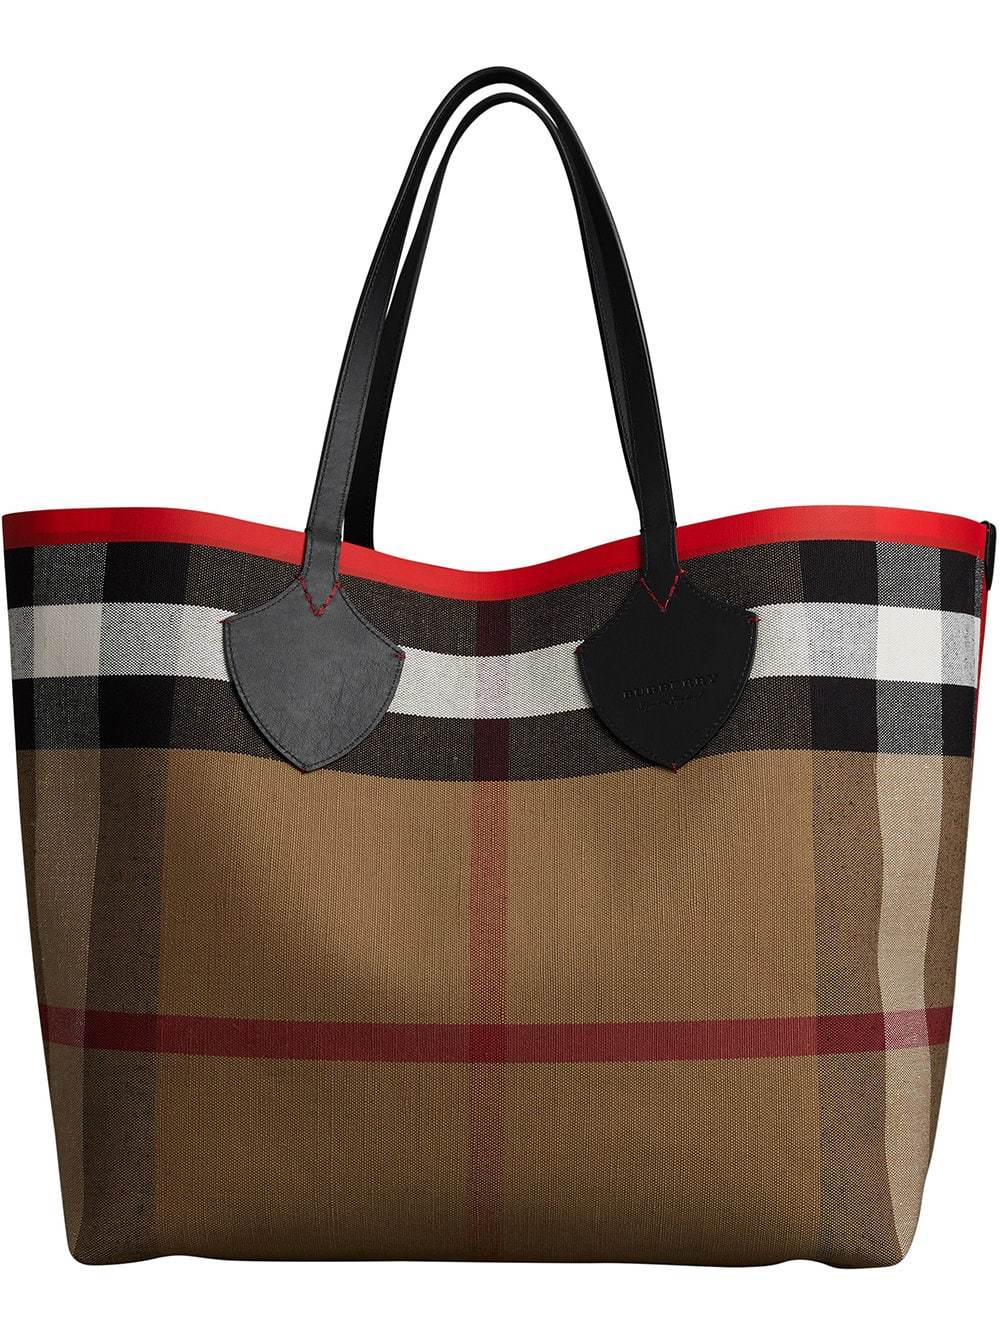 Burberry Reversible Brown and Black E-Canvas Leather Giant Check